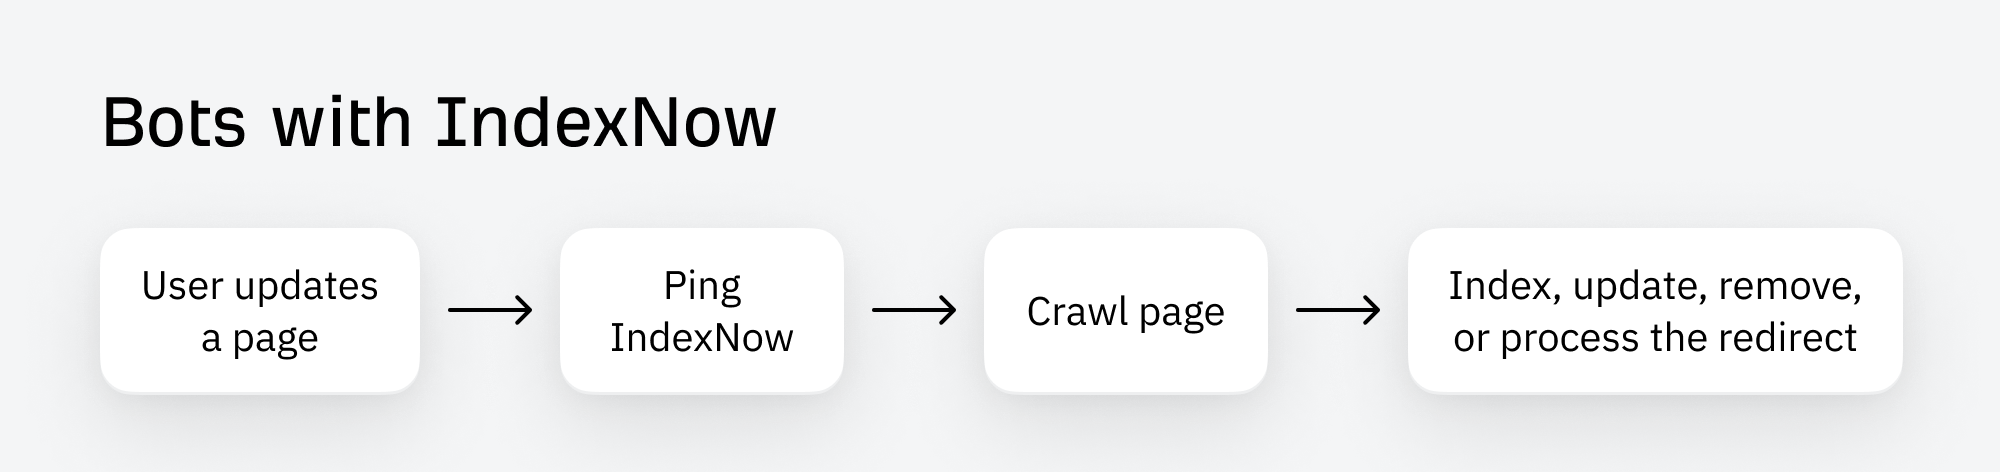 How crawling works with IndexNow to update the index